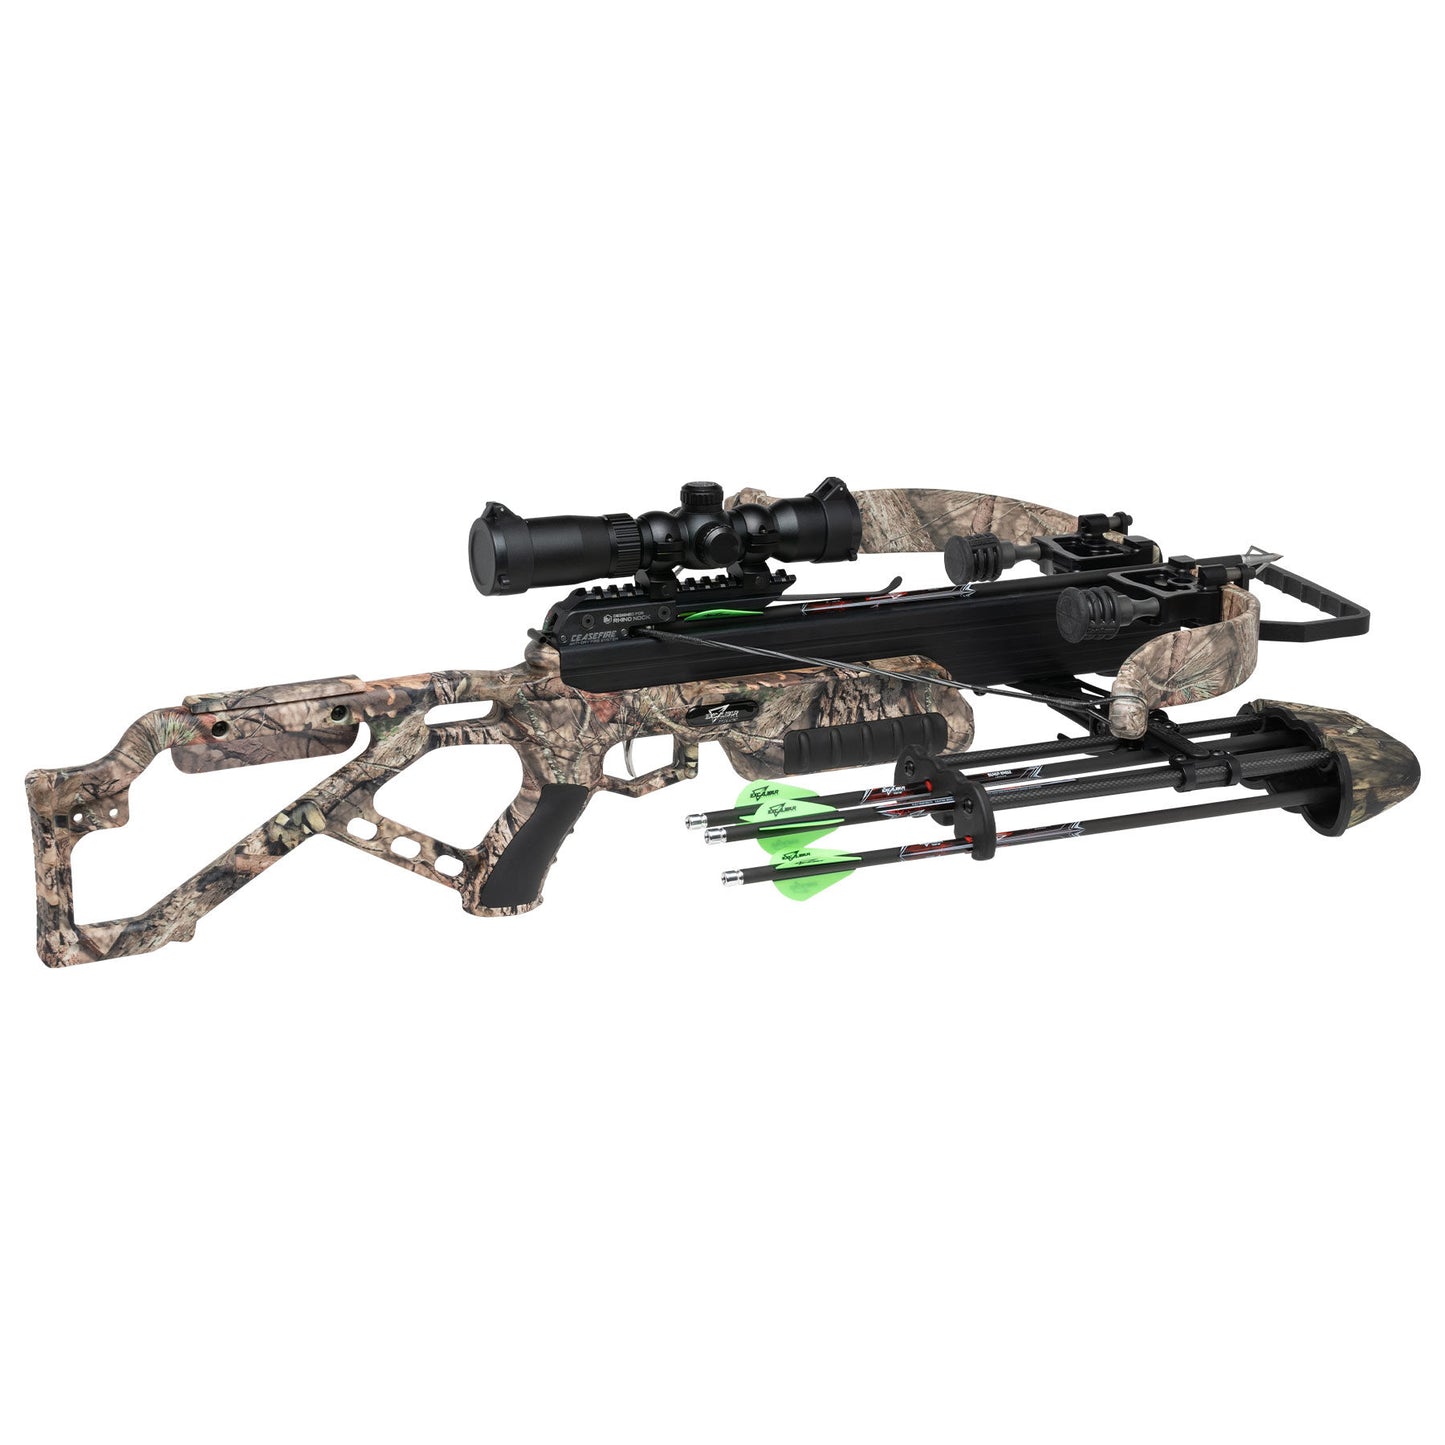 Excalibur Micro 380 Excape Crossbow Package